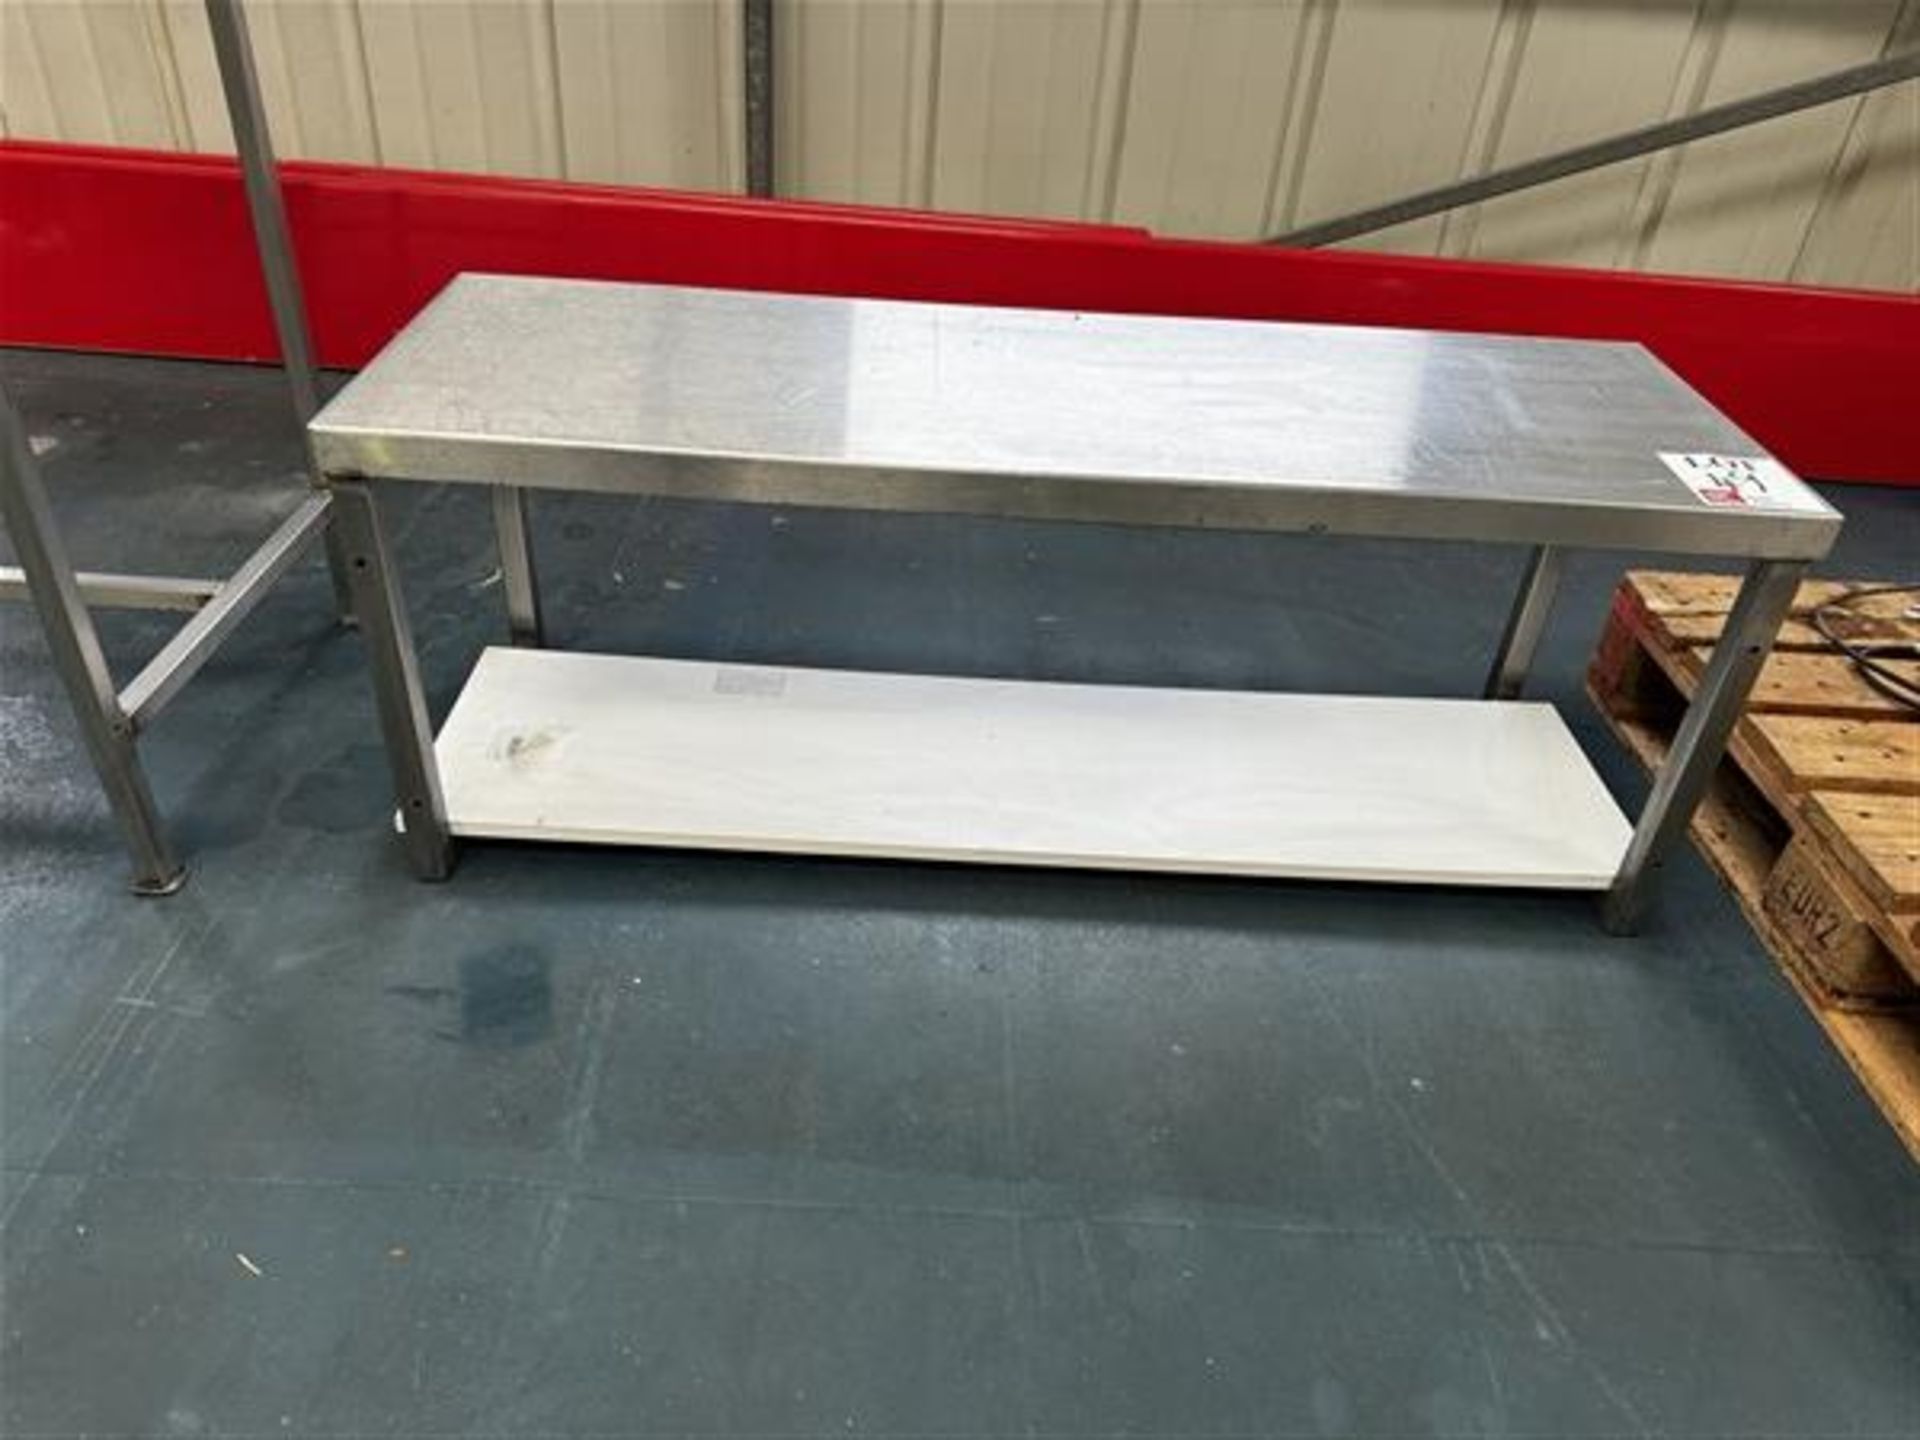 Low standing stainless steel table, H 46cm x L 1.2m x W 40cm